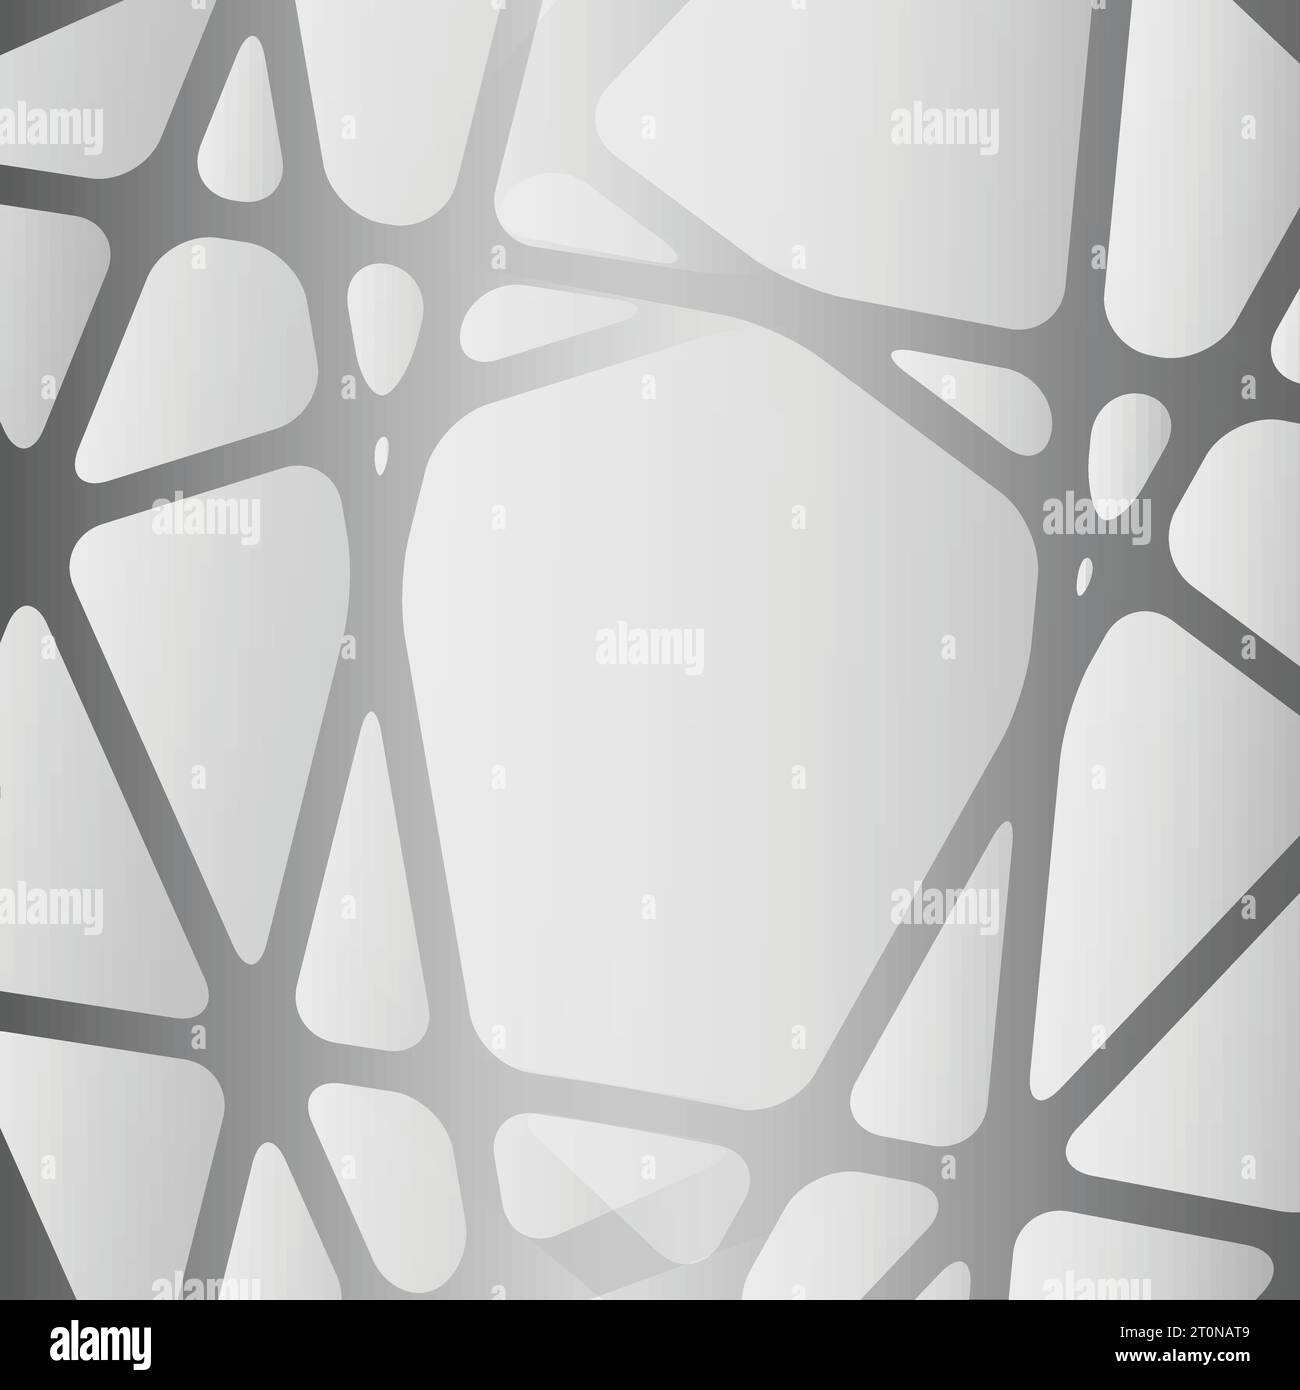 Abstract Background - Networks Stock Vector